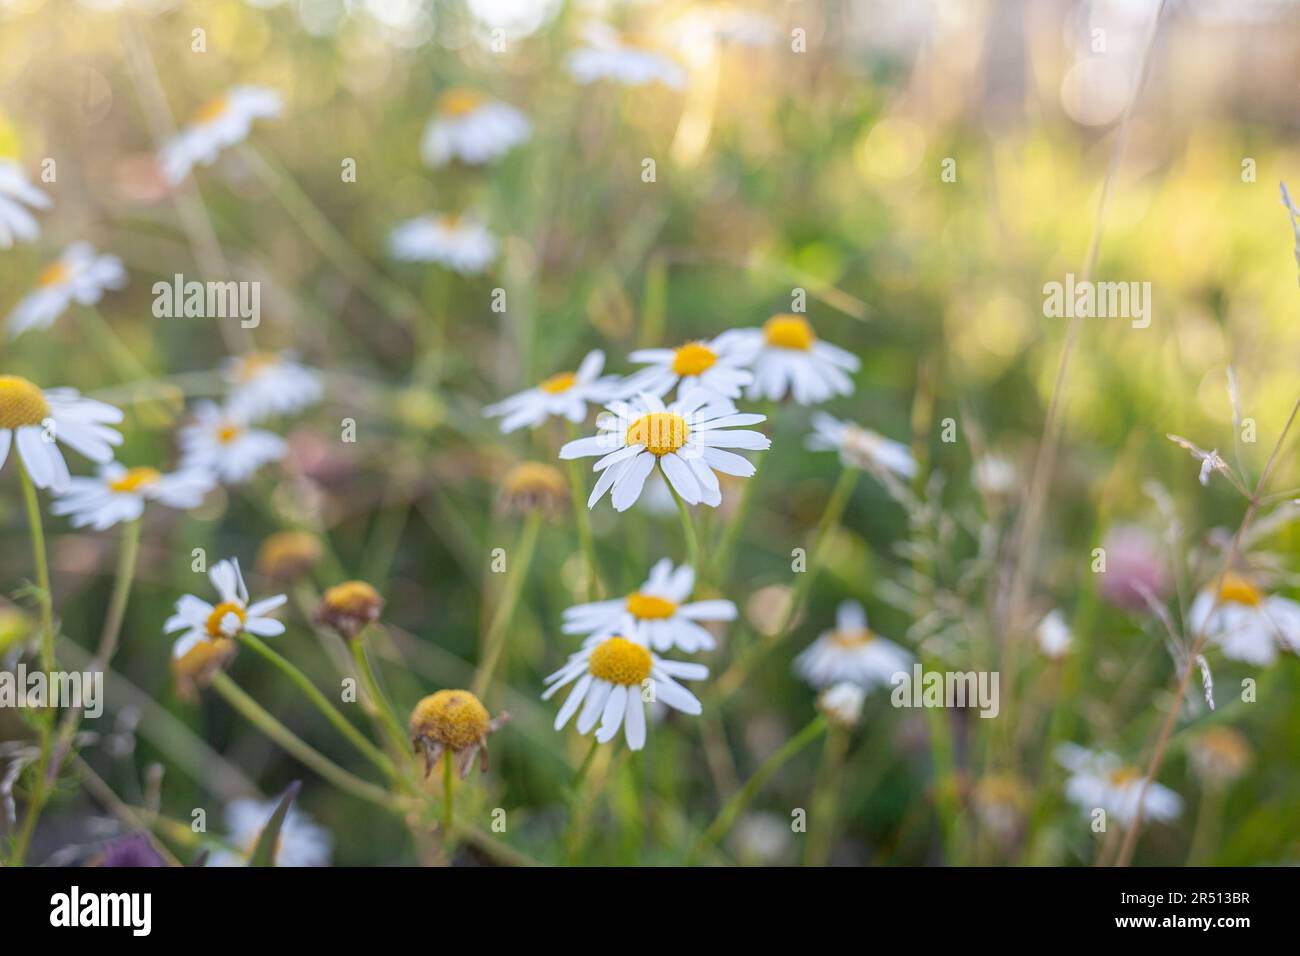 Beautiful background of many blooming daisies field. Chamomile grass close-up. Beautiful meadow in springtime full of flowering daisies with white yel Stock Photo